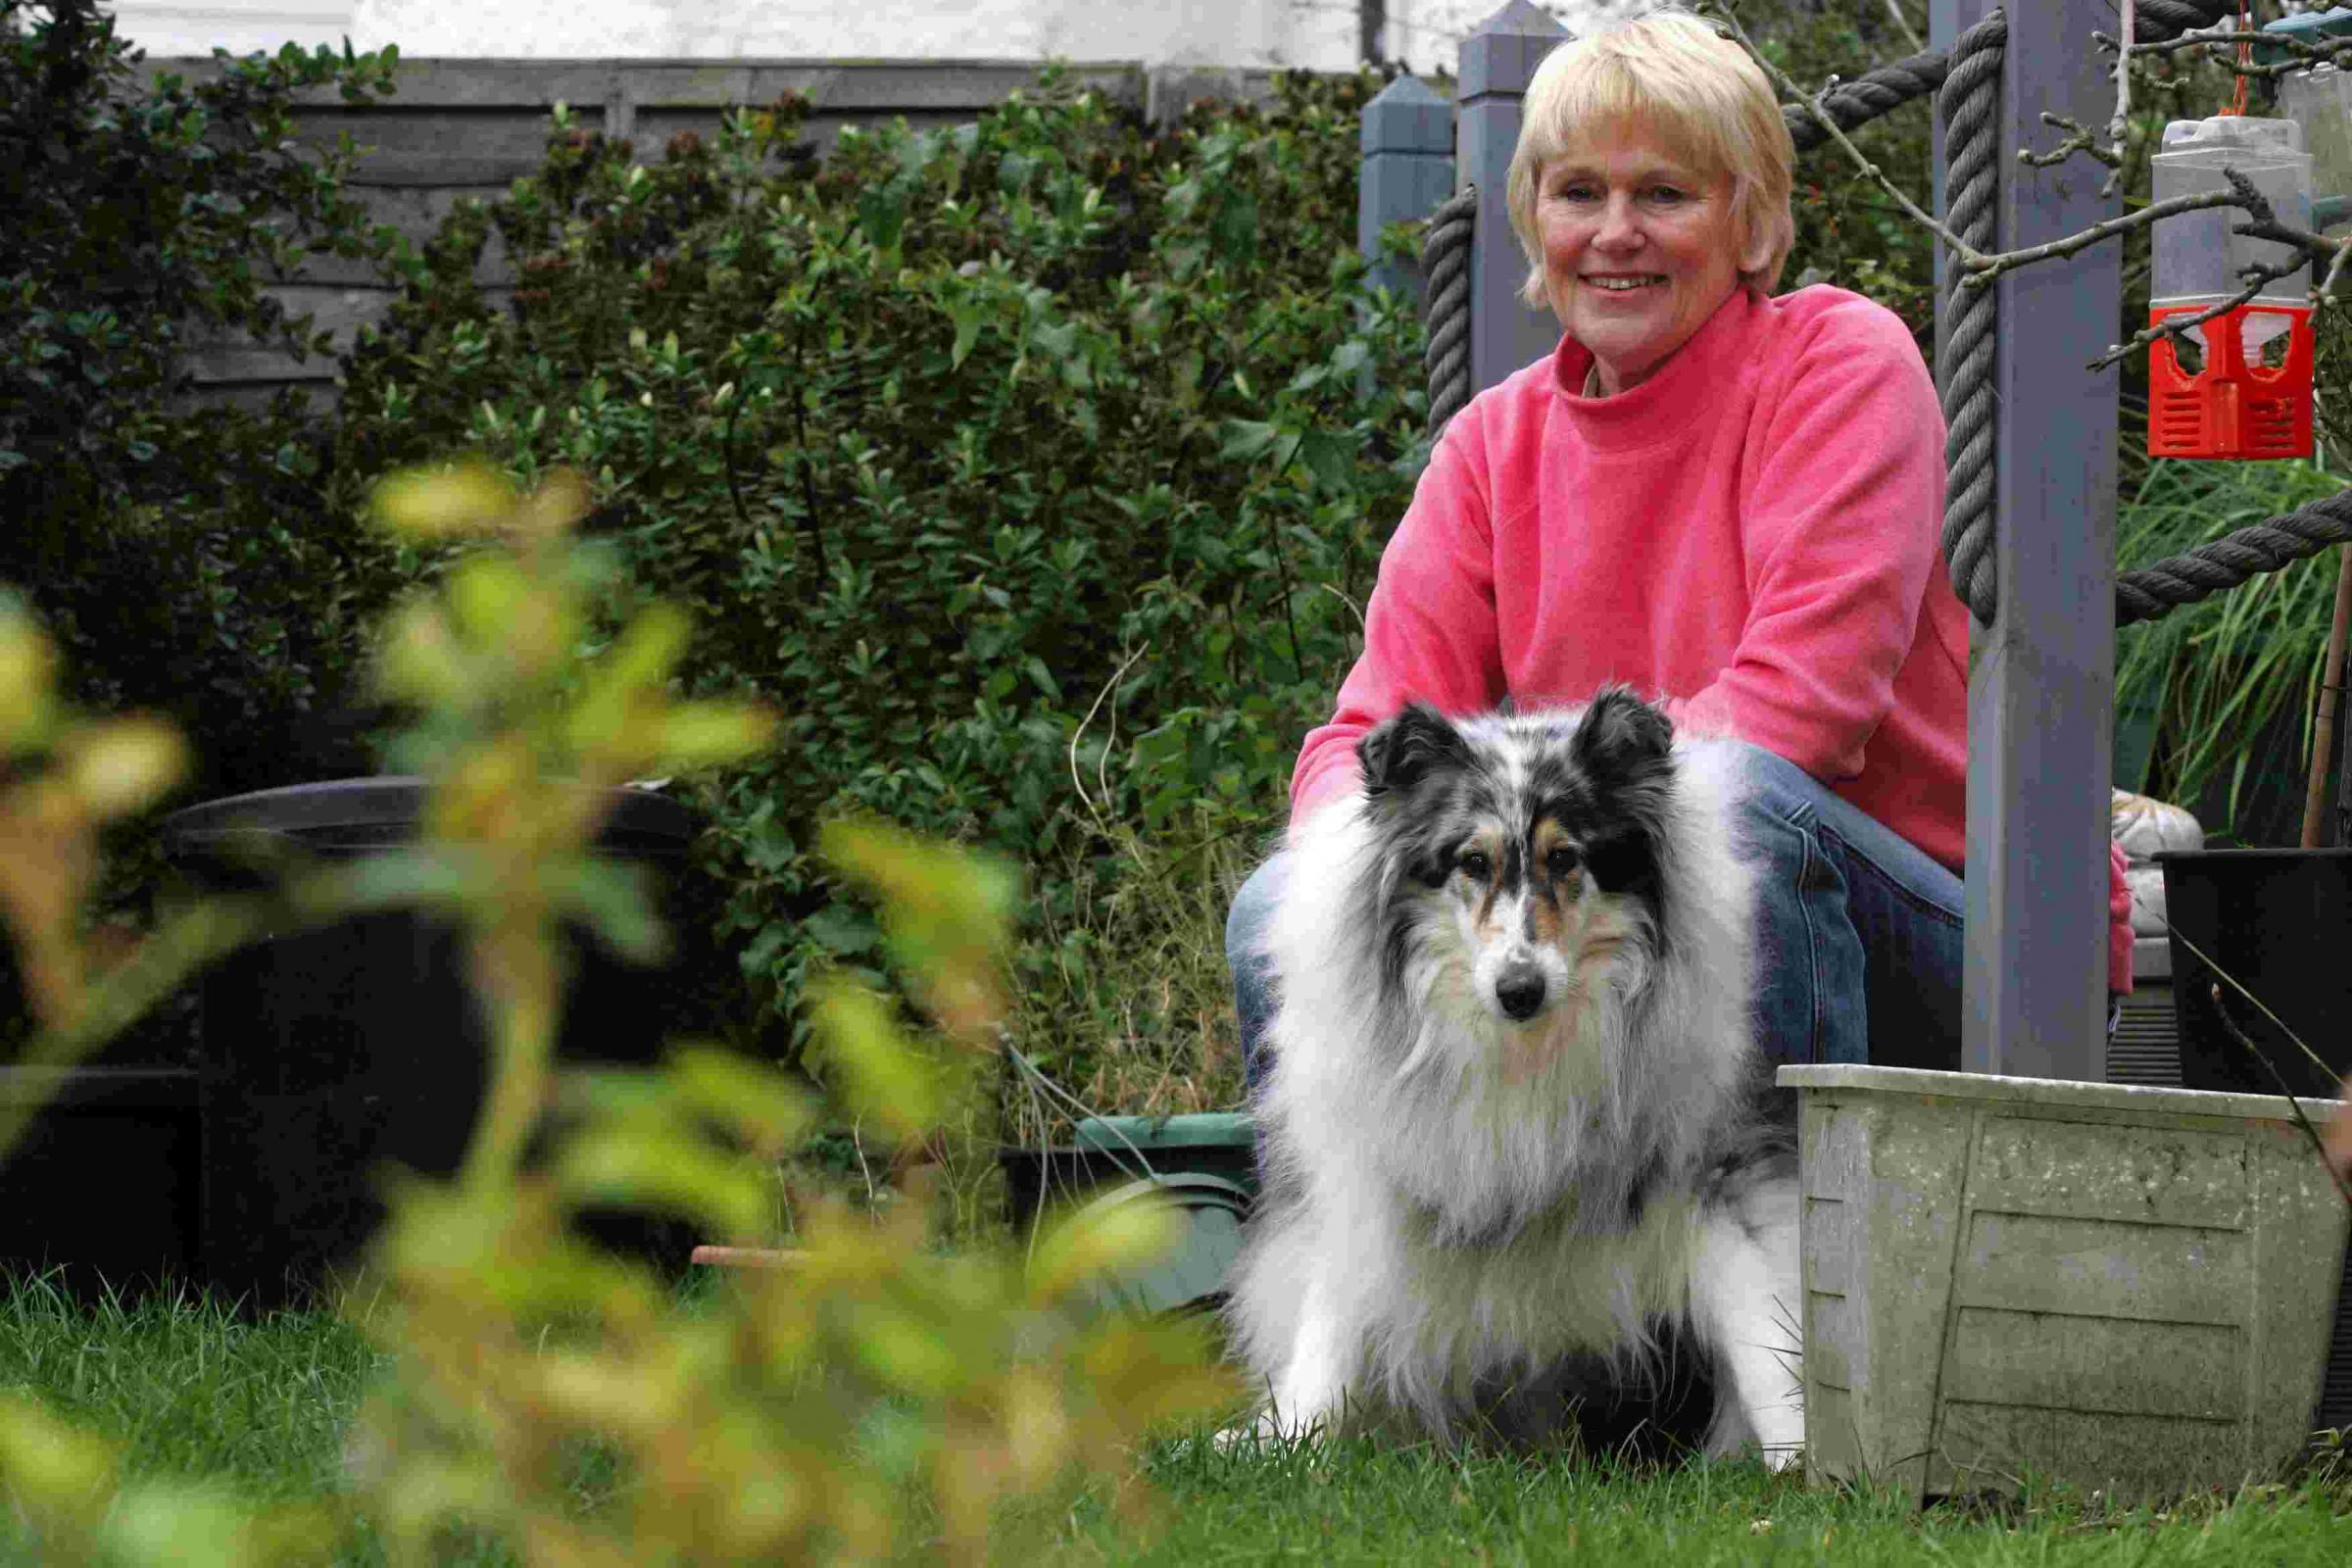 Pic by Sally Adams 18/3/08 bIgcat2 Pam Skilton with her dog Sadie in her garden where she saw the big cat.